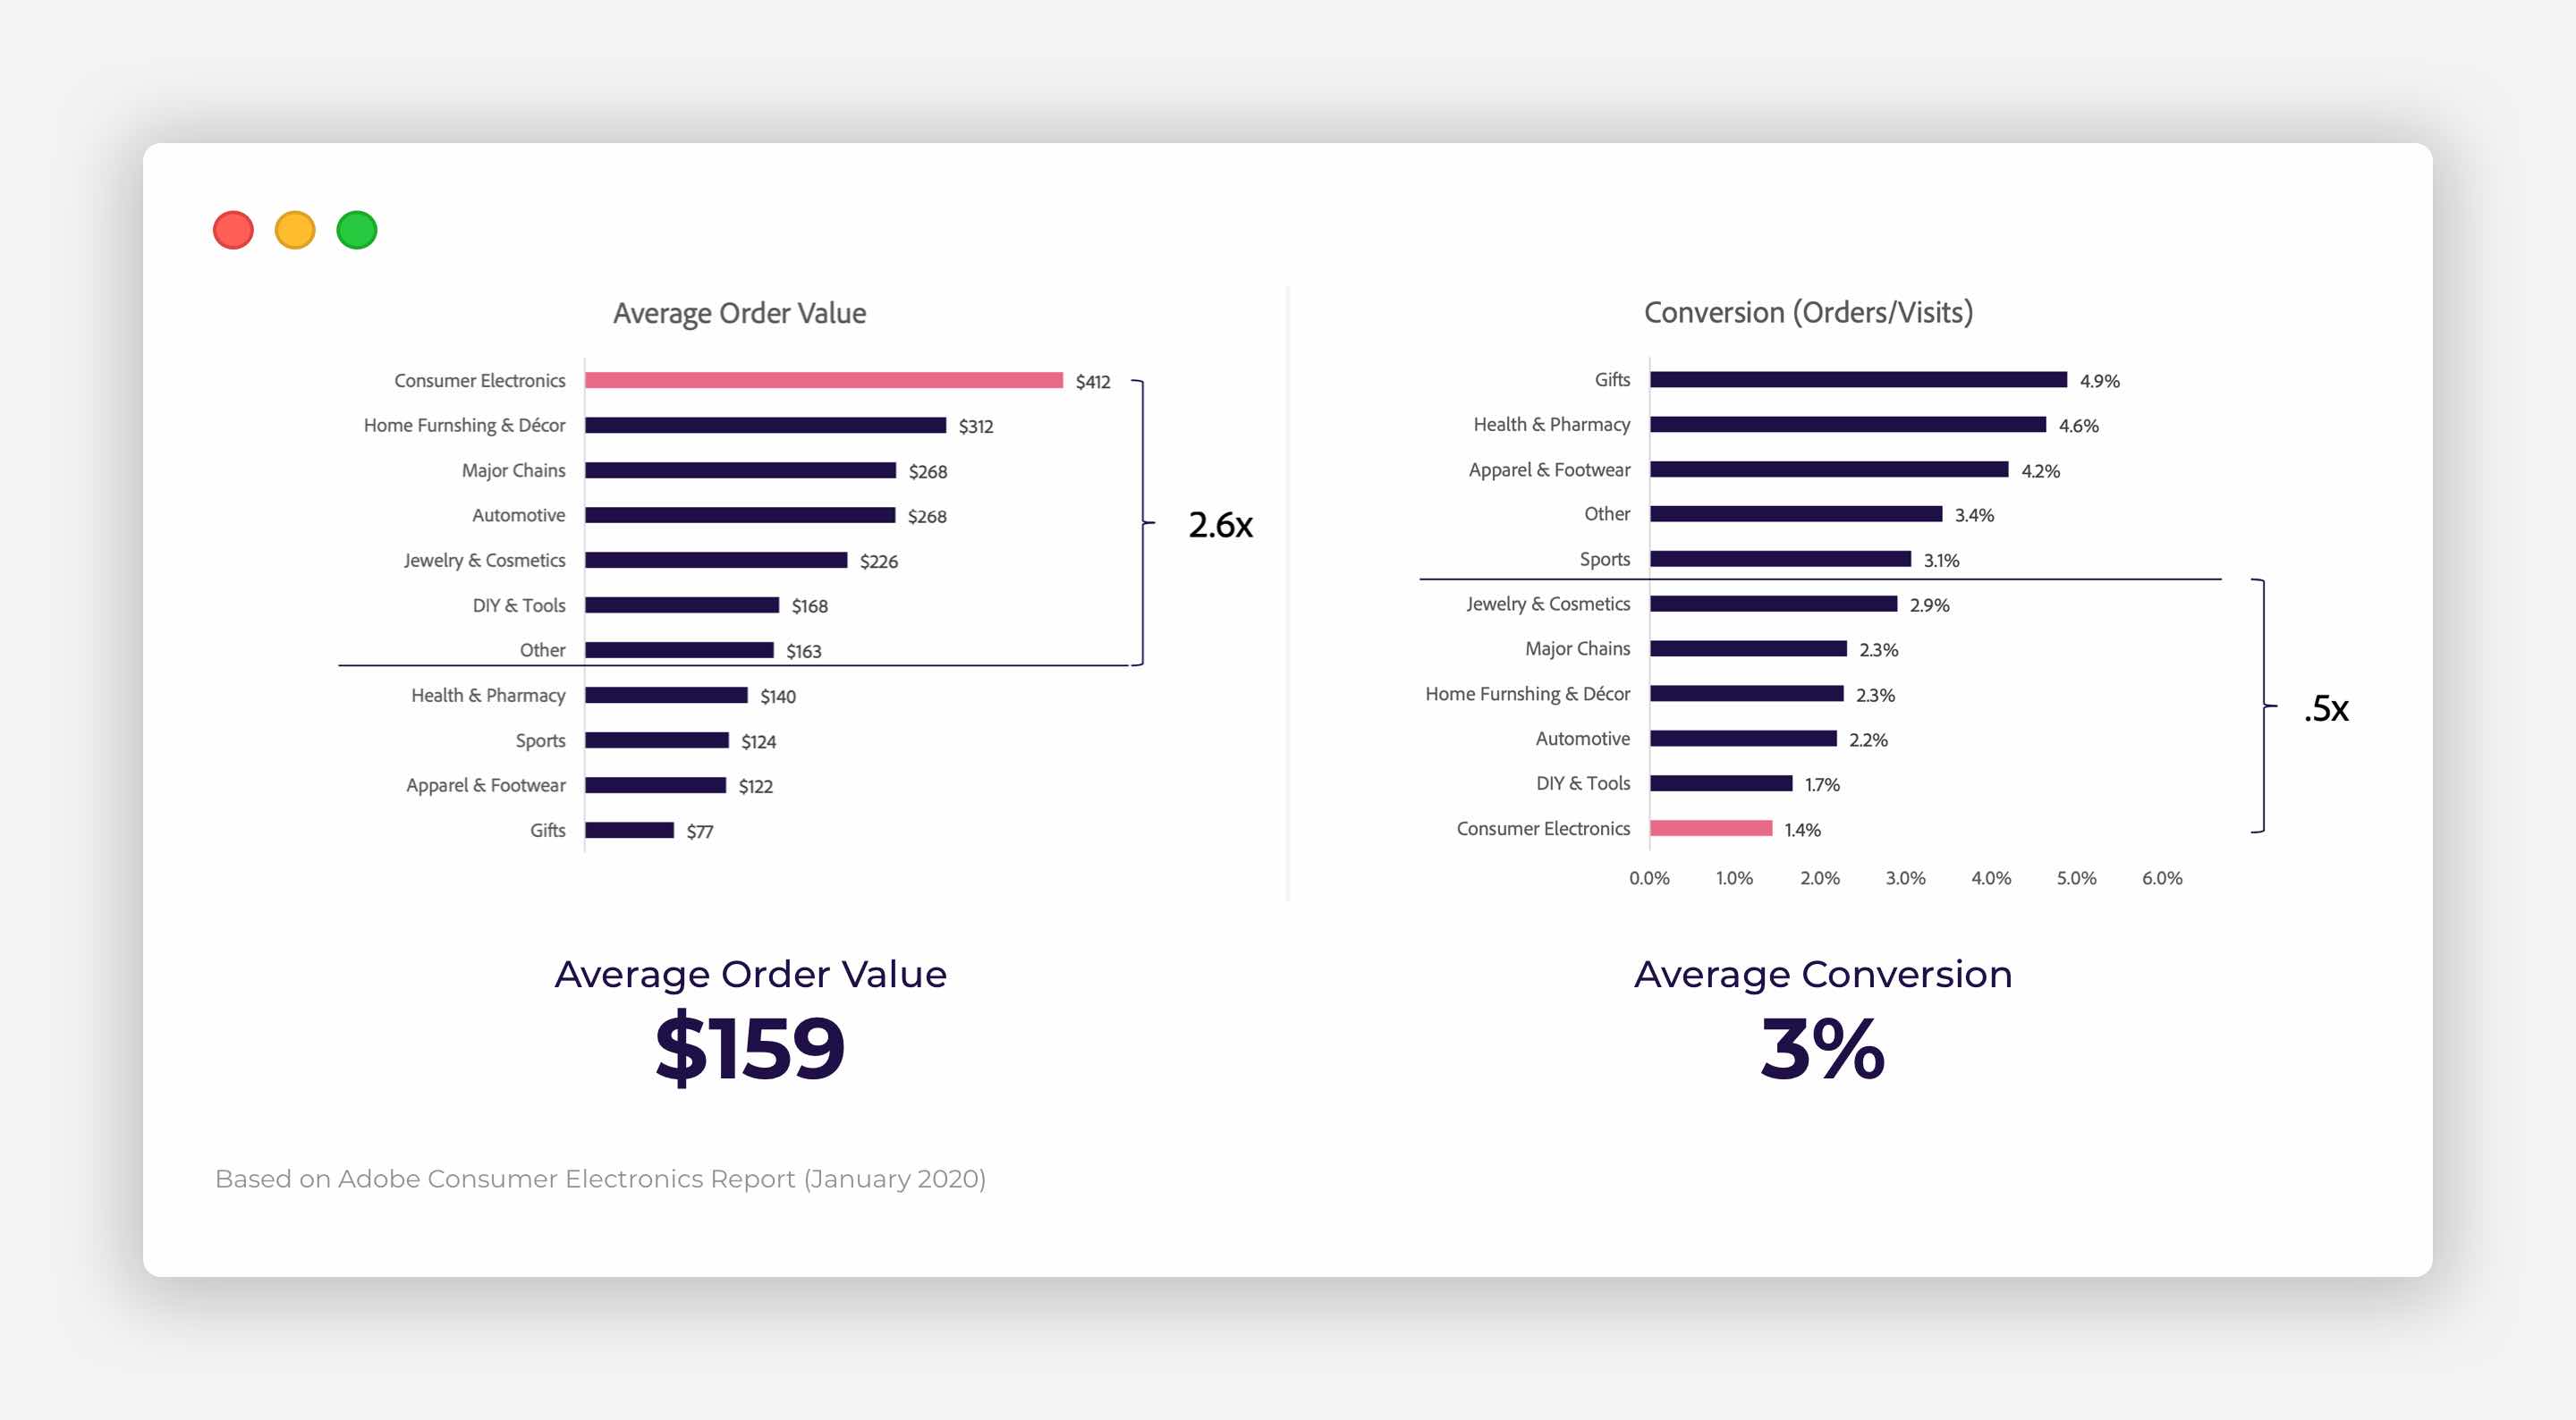 Average conversion and average order value, according to Adobe Consumer Electronics Report 2020